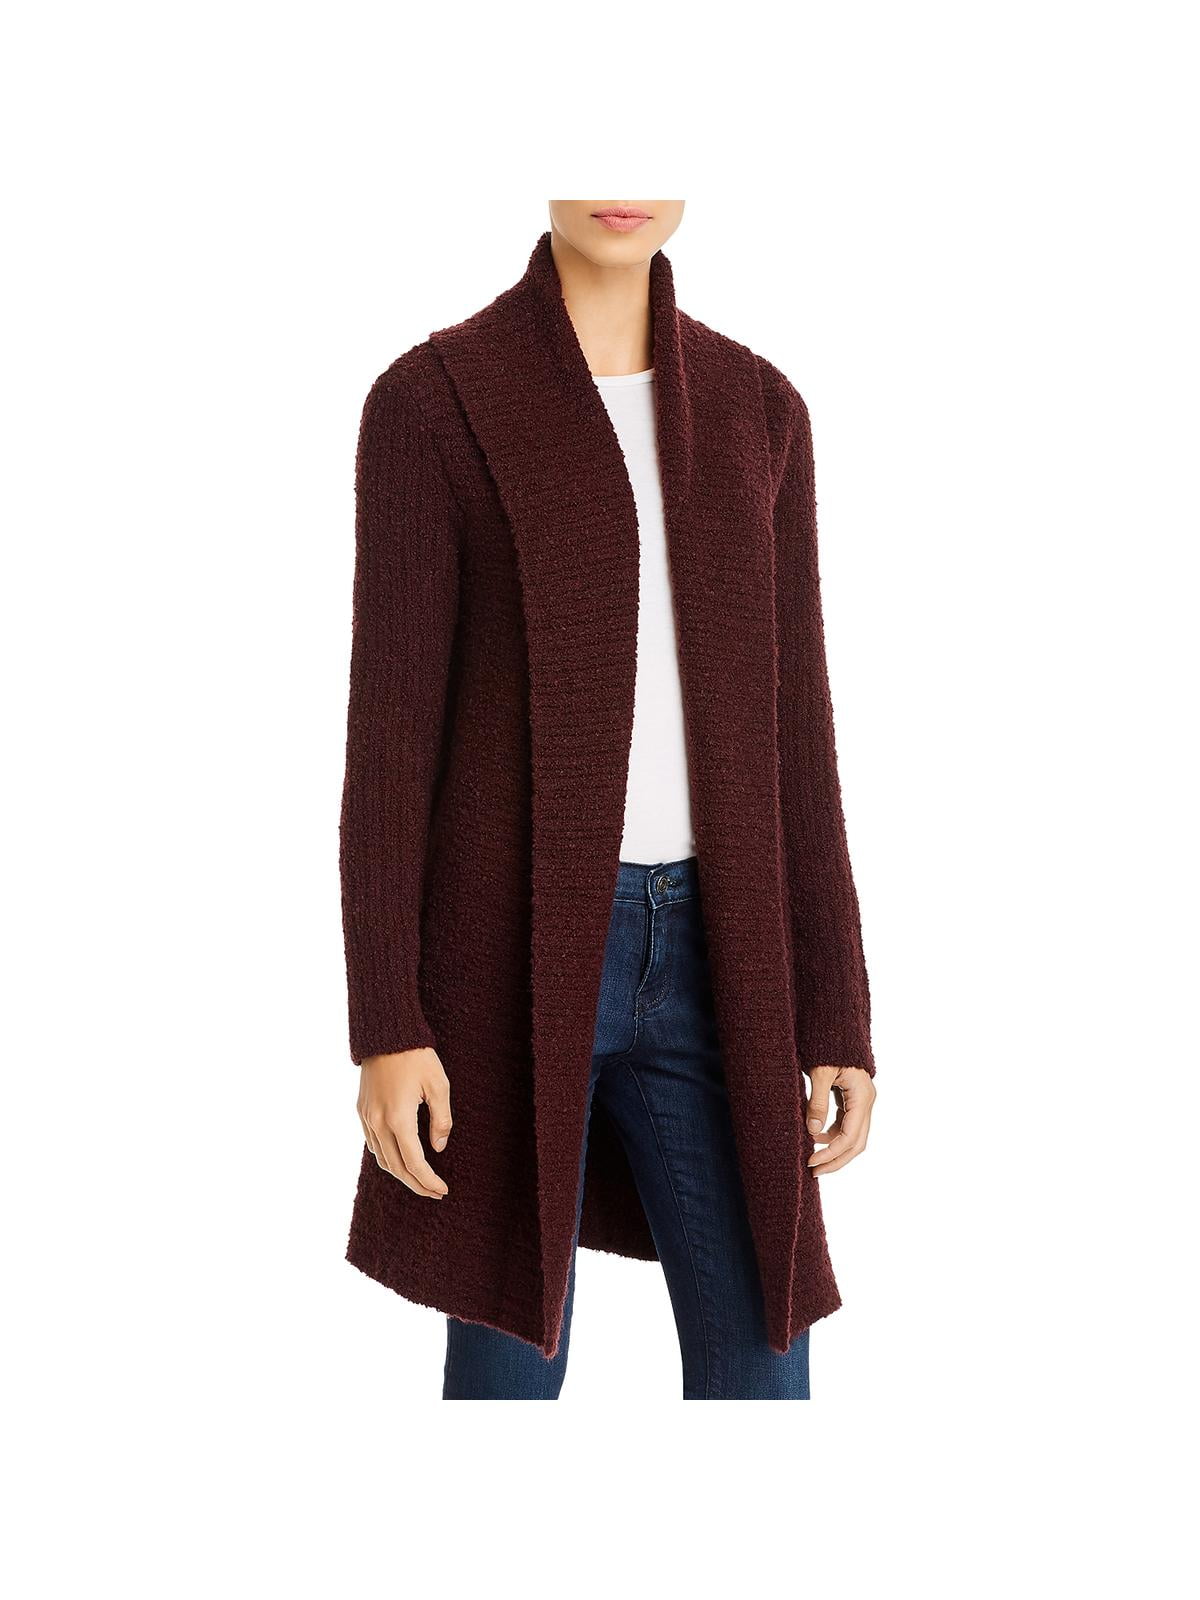 FNKDOR Women's Ribbed Knit Cardigan Sweater Coat Solid Long-sleeved Coat With Pockets